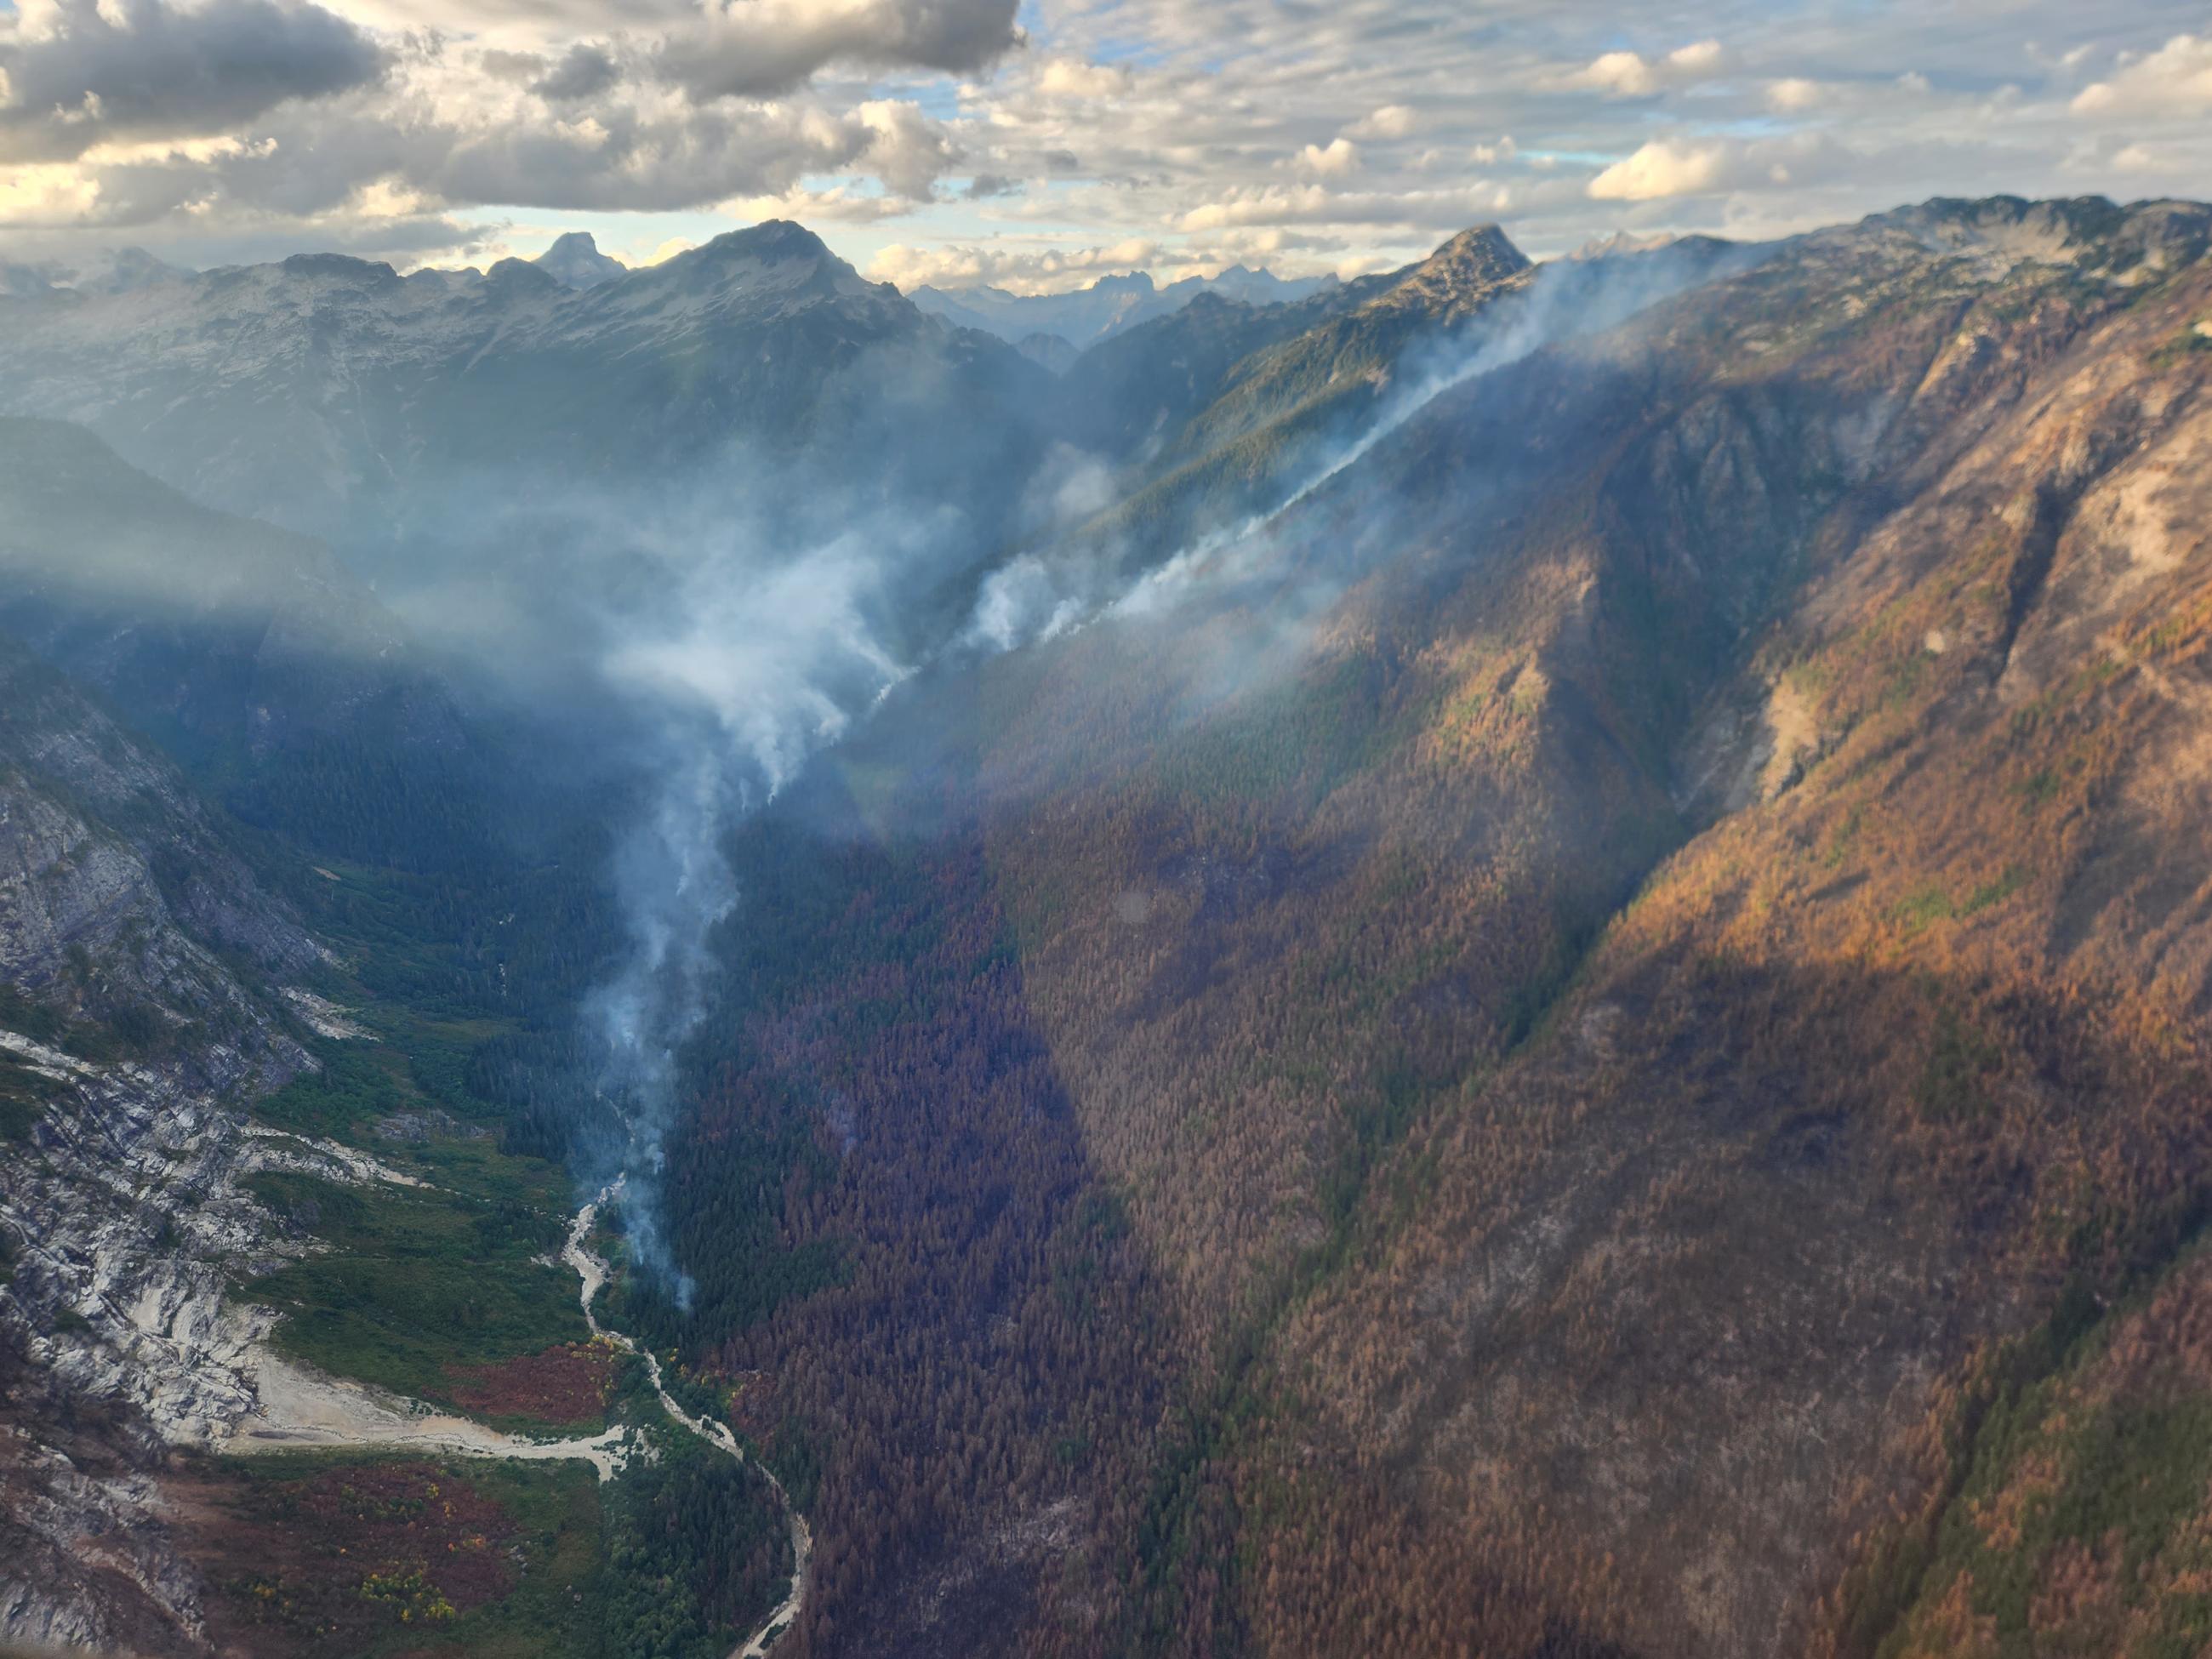 Wisps of smoke in a forested mountain drainage